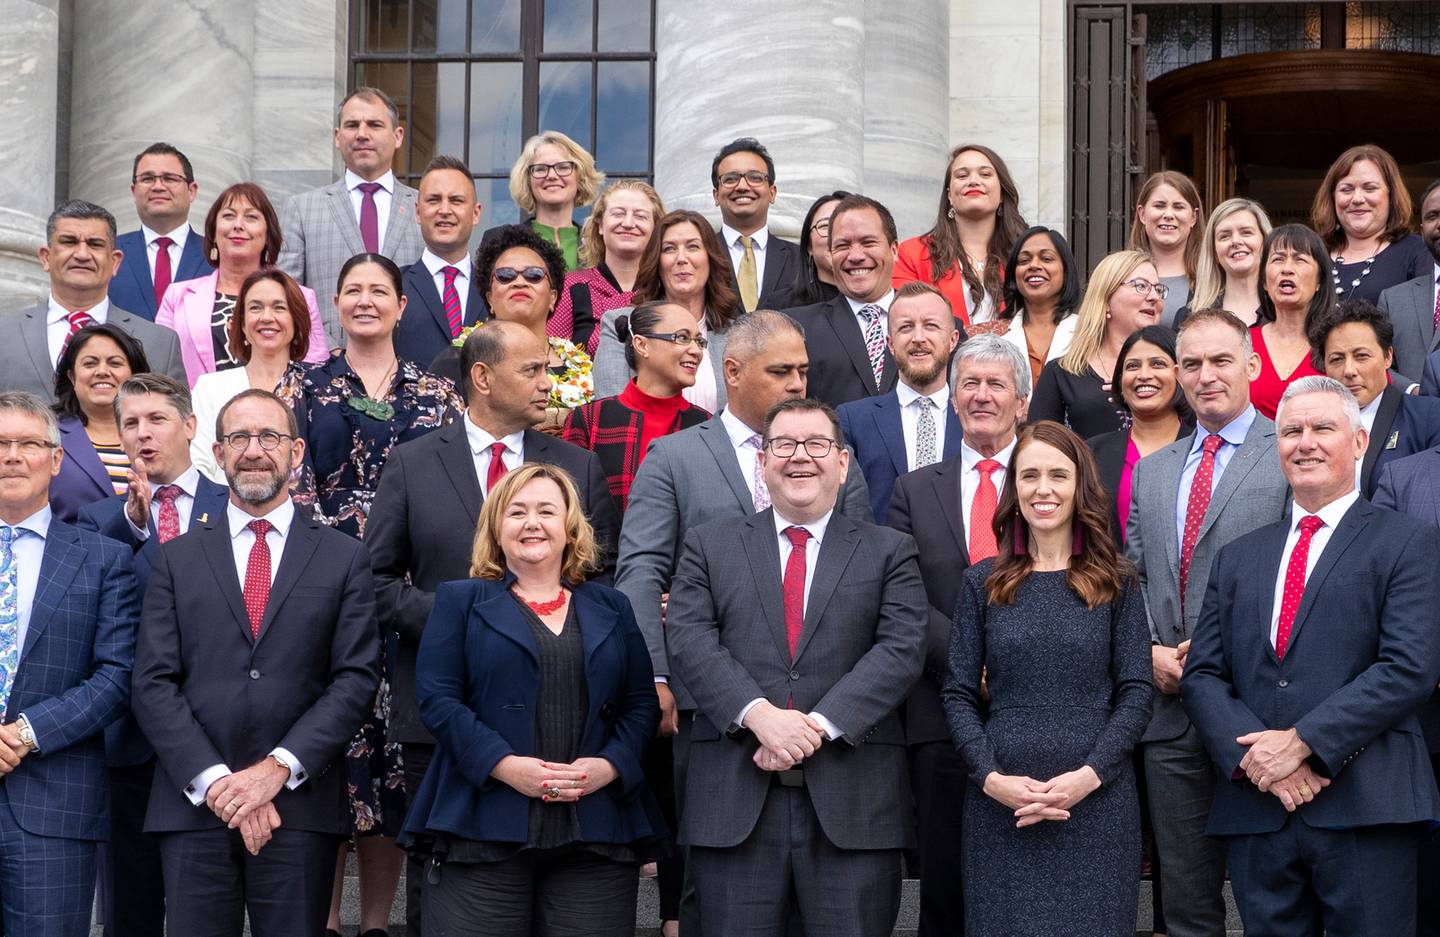 MP for Hamilton West Dr Gaurav Sharma (back row, centre) seen with his Labour colleagues on the steps of Parliament in 2020. Photo: Mark Mitchell